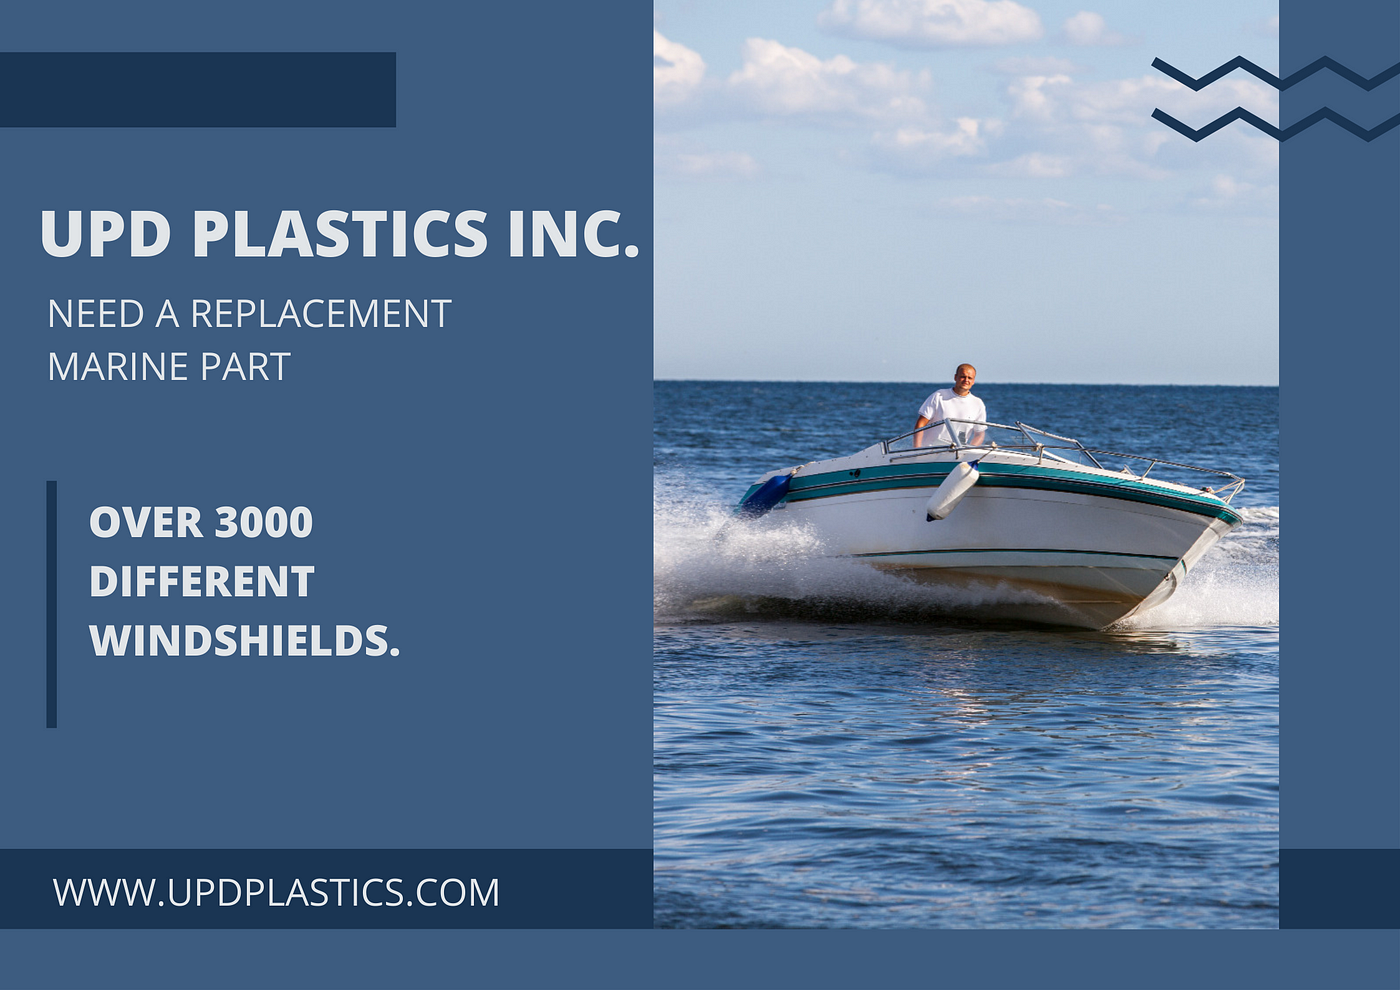 How to Make a Custom Boat Windshield?, by Upd Plastics